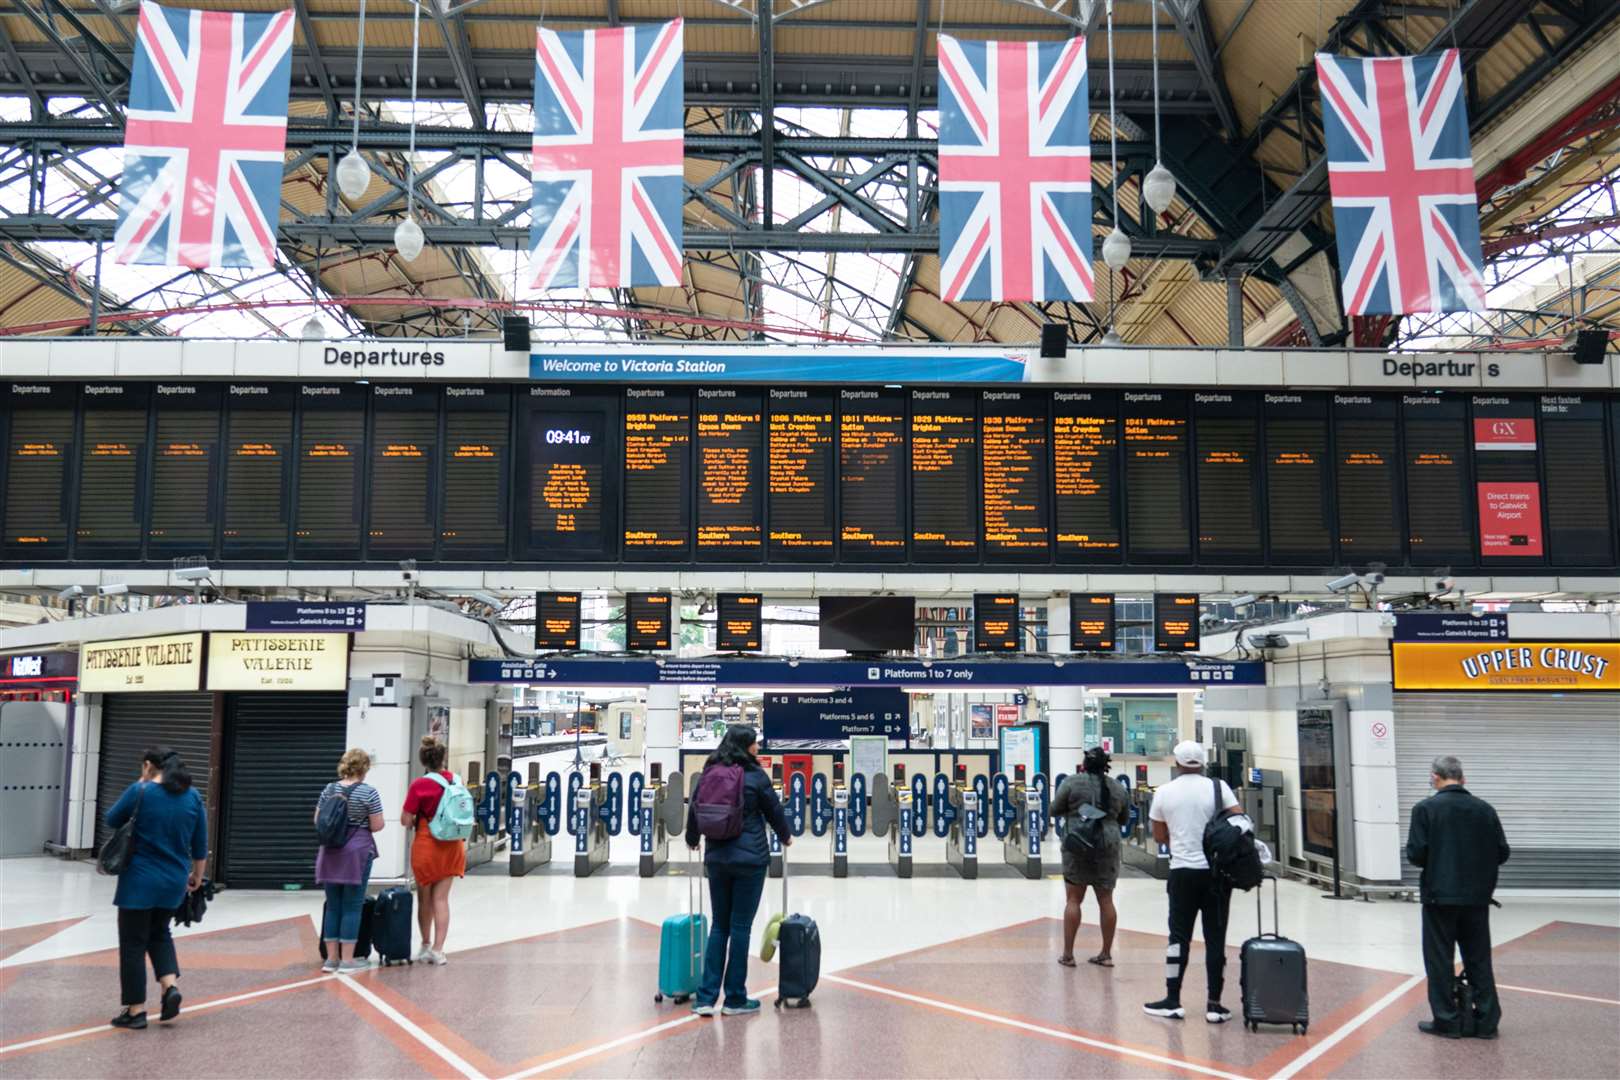 Passengers view departure boards at Victoria station in London (Dominic Lipinski/PA)